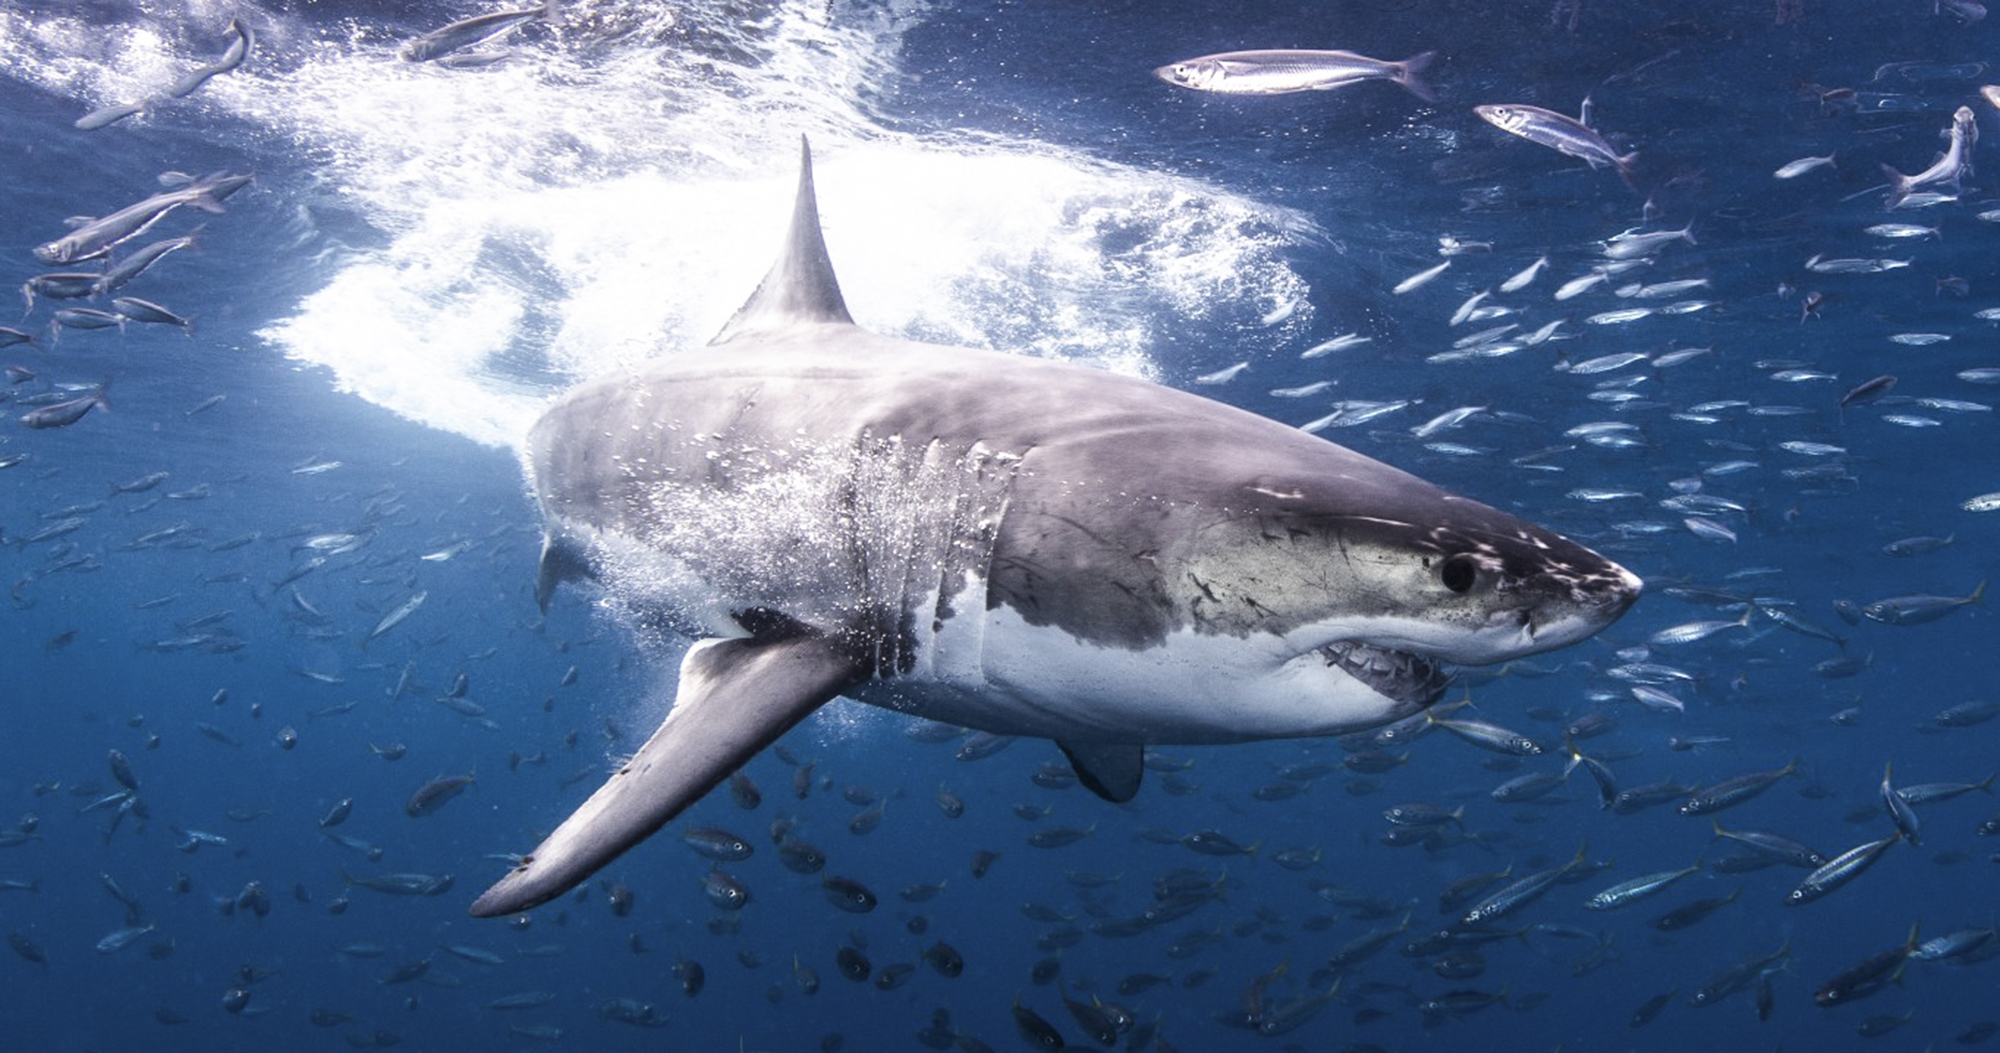 Stunning great white at Guadalupe